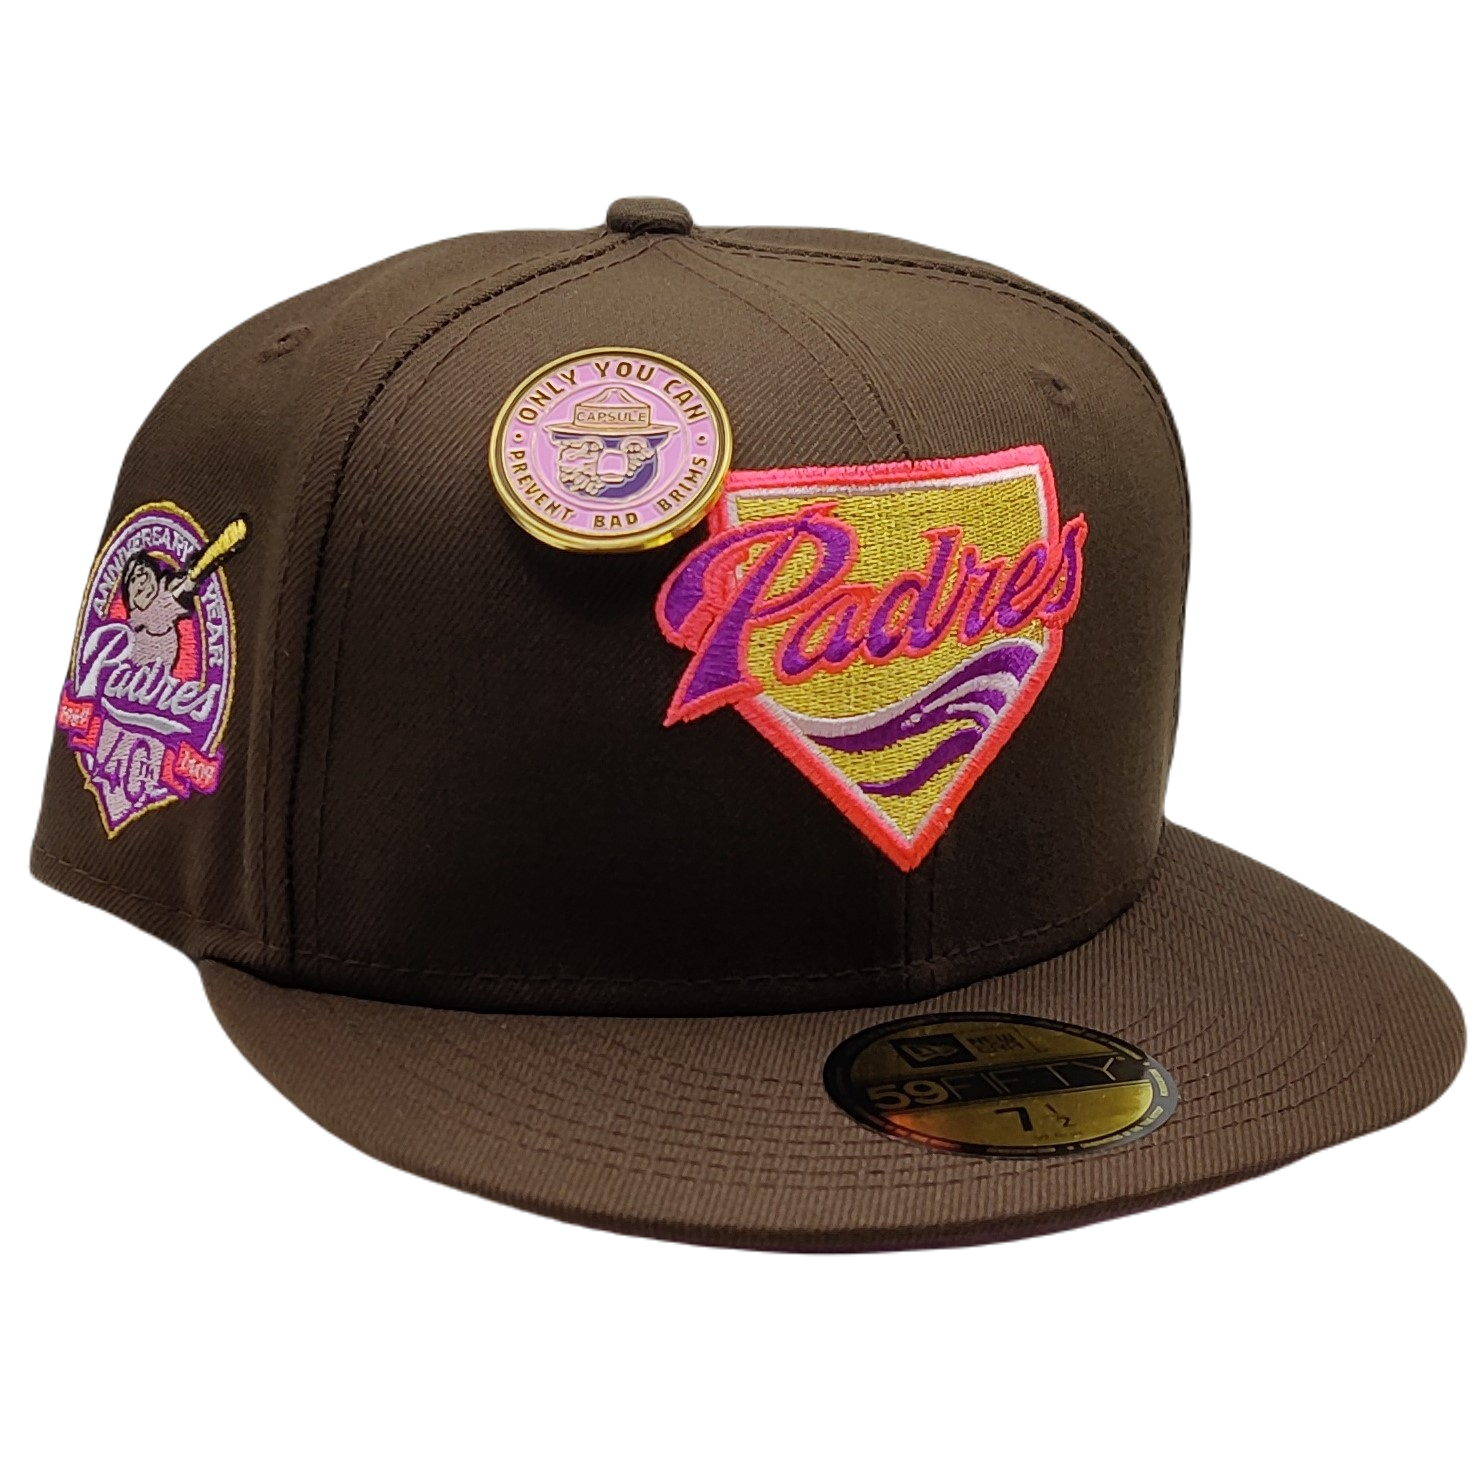 New Era San Diego Padres 40th Anniversary Black Two Tone Prime Edition  59Fifty Fitted Hat, EXCLUSIVE HATS, CAPS